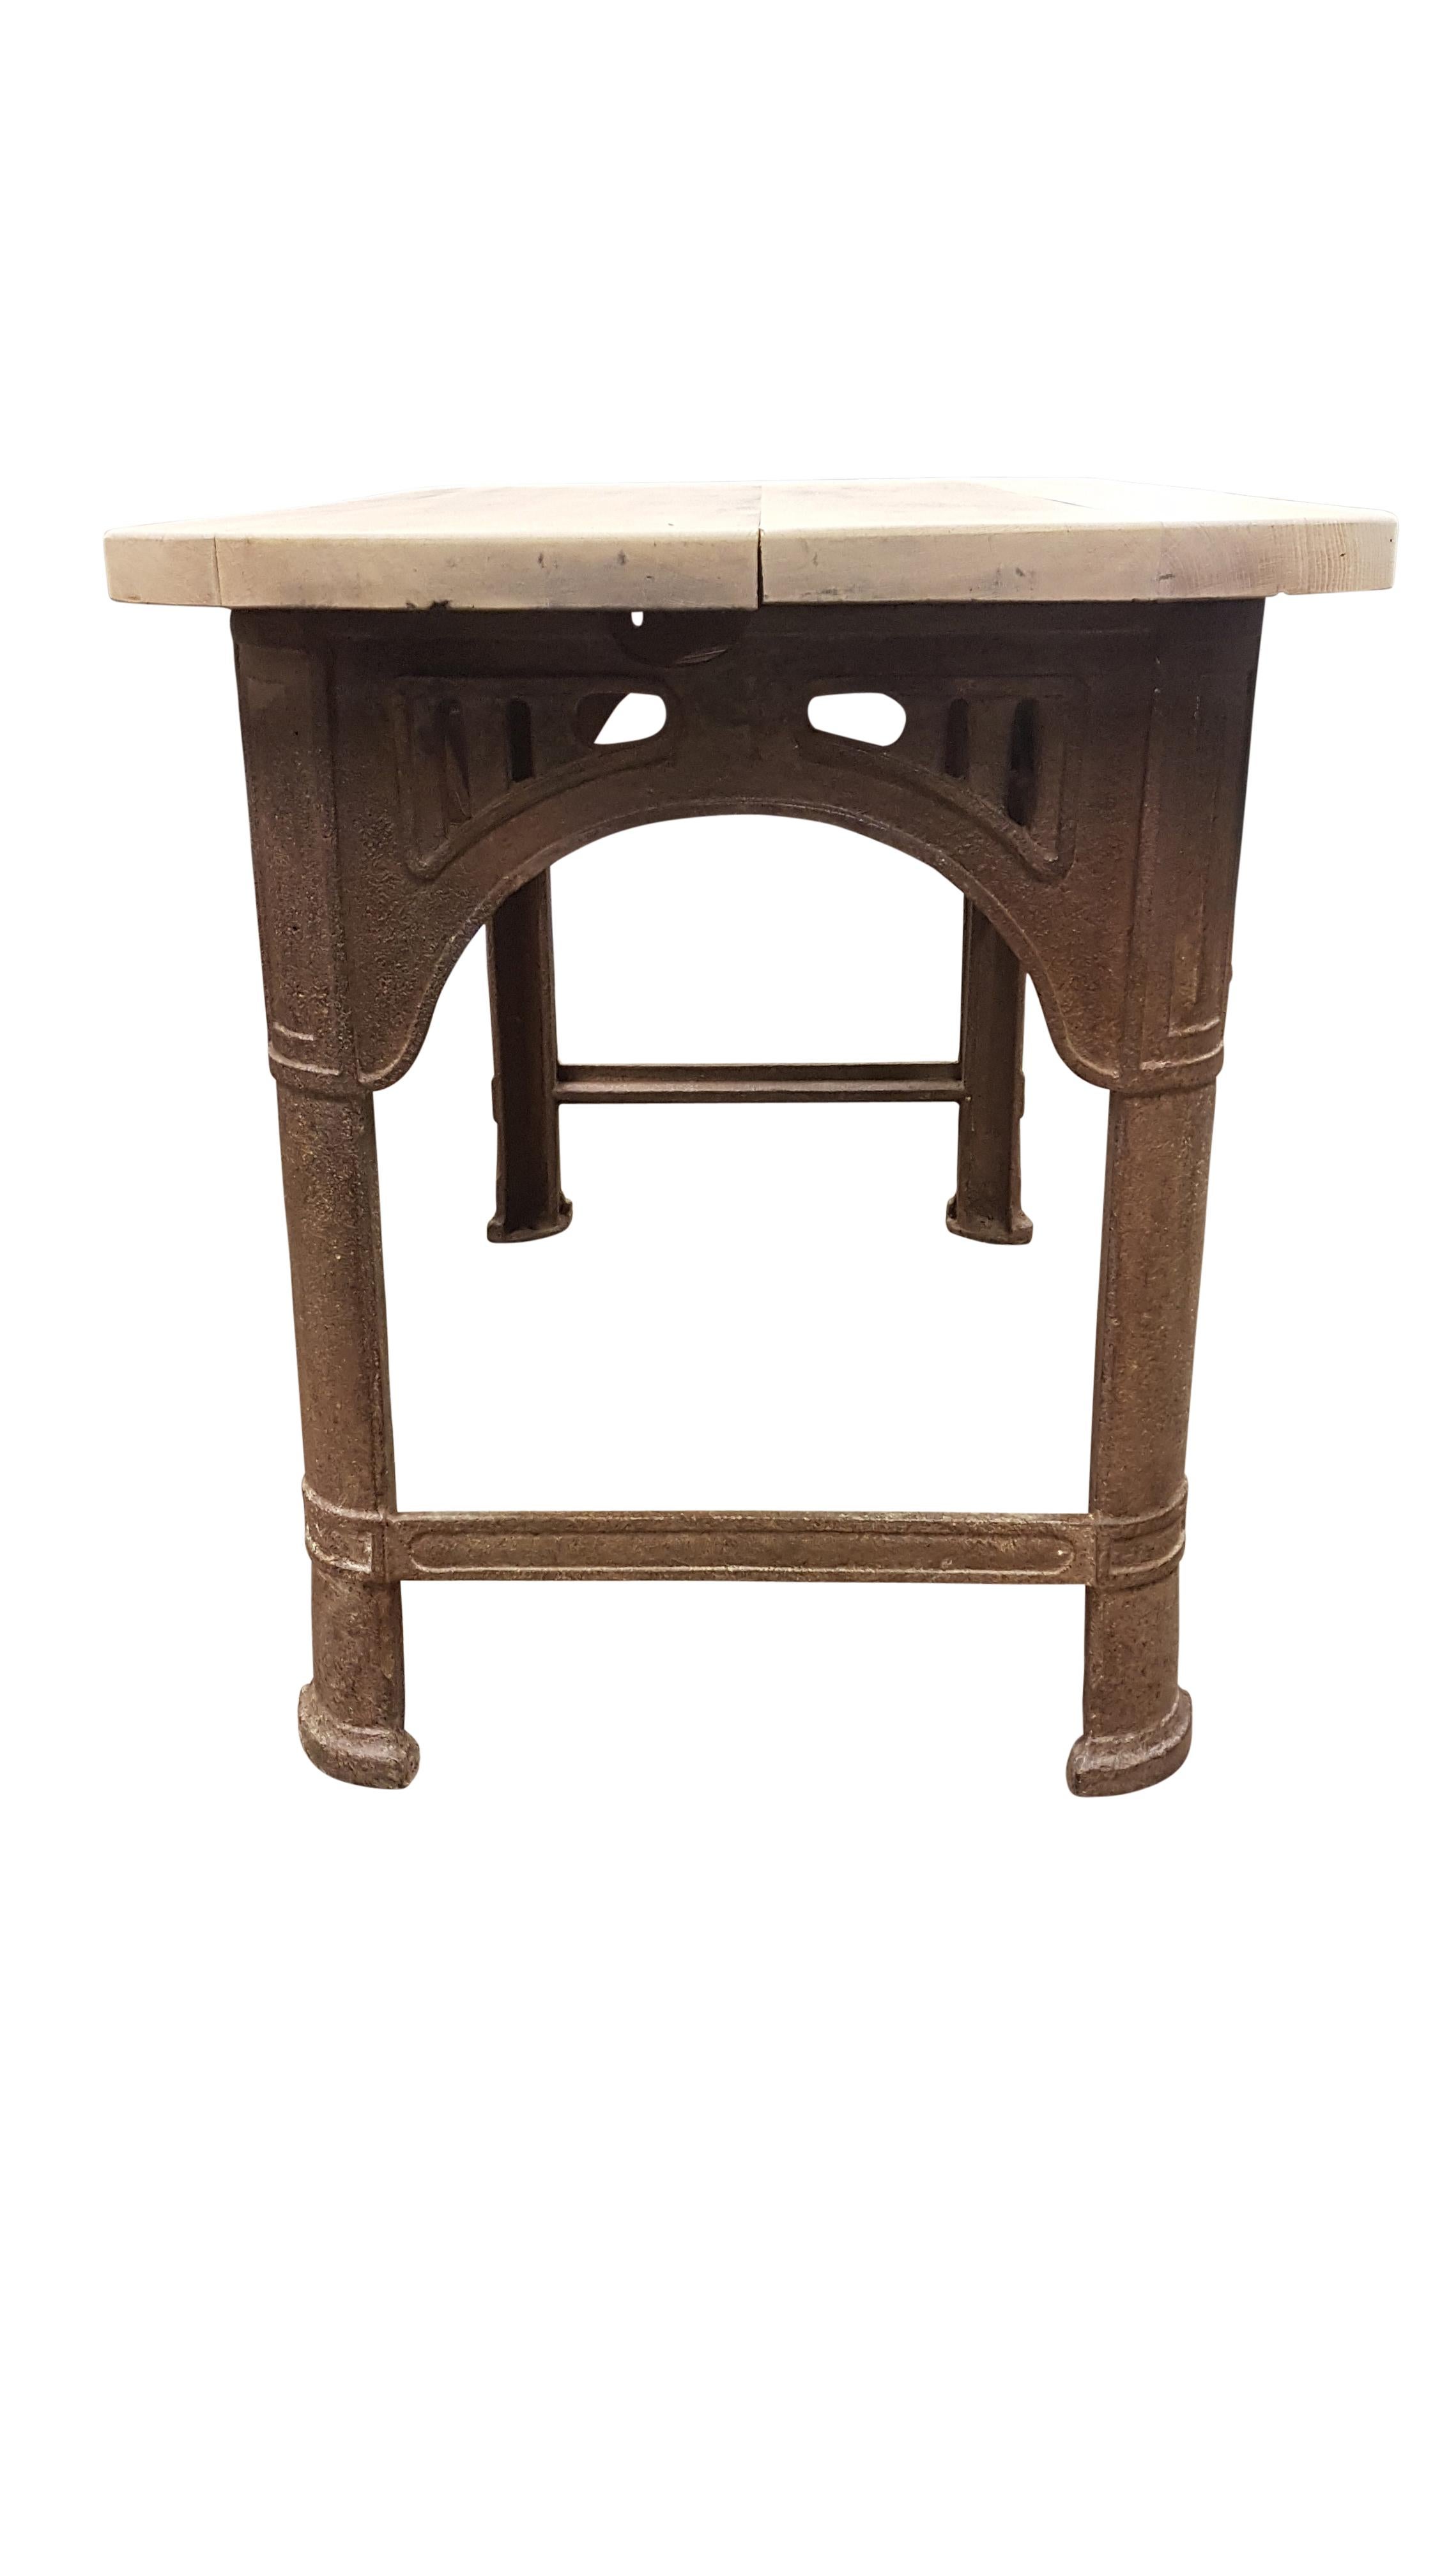 Late 19th Century Industrial Cast Iron Table with Royal Coat of Arms for the United Kingdom For Sale